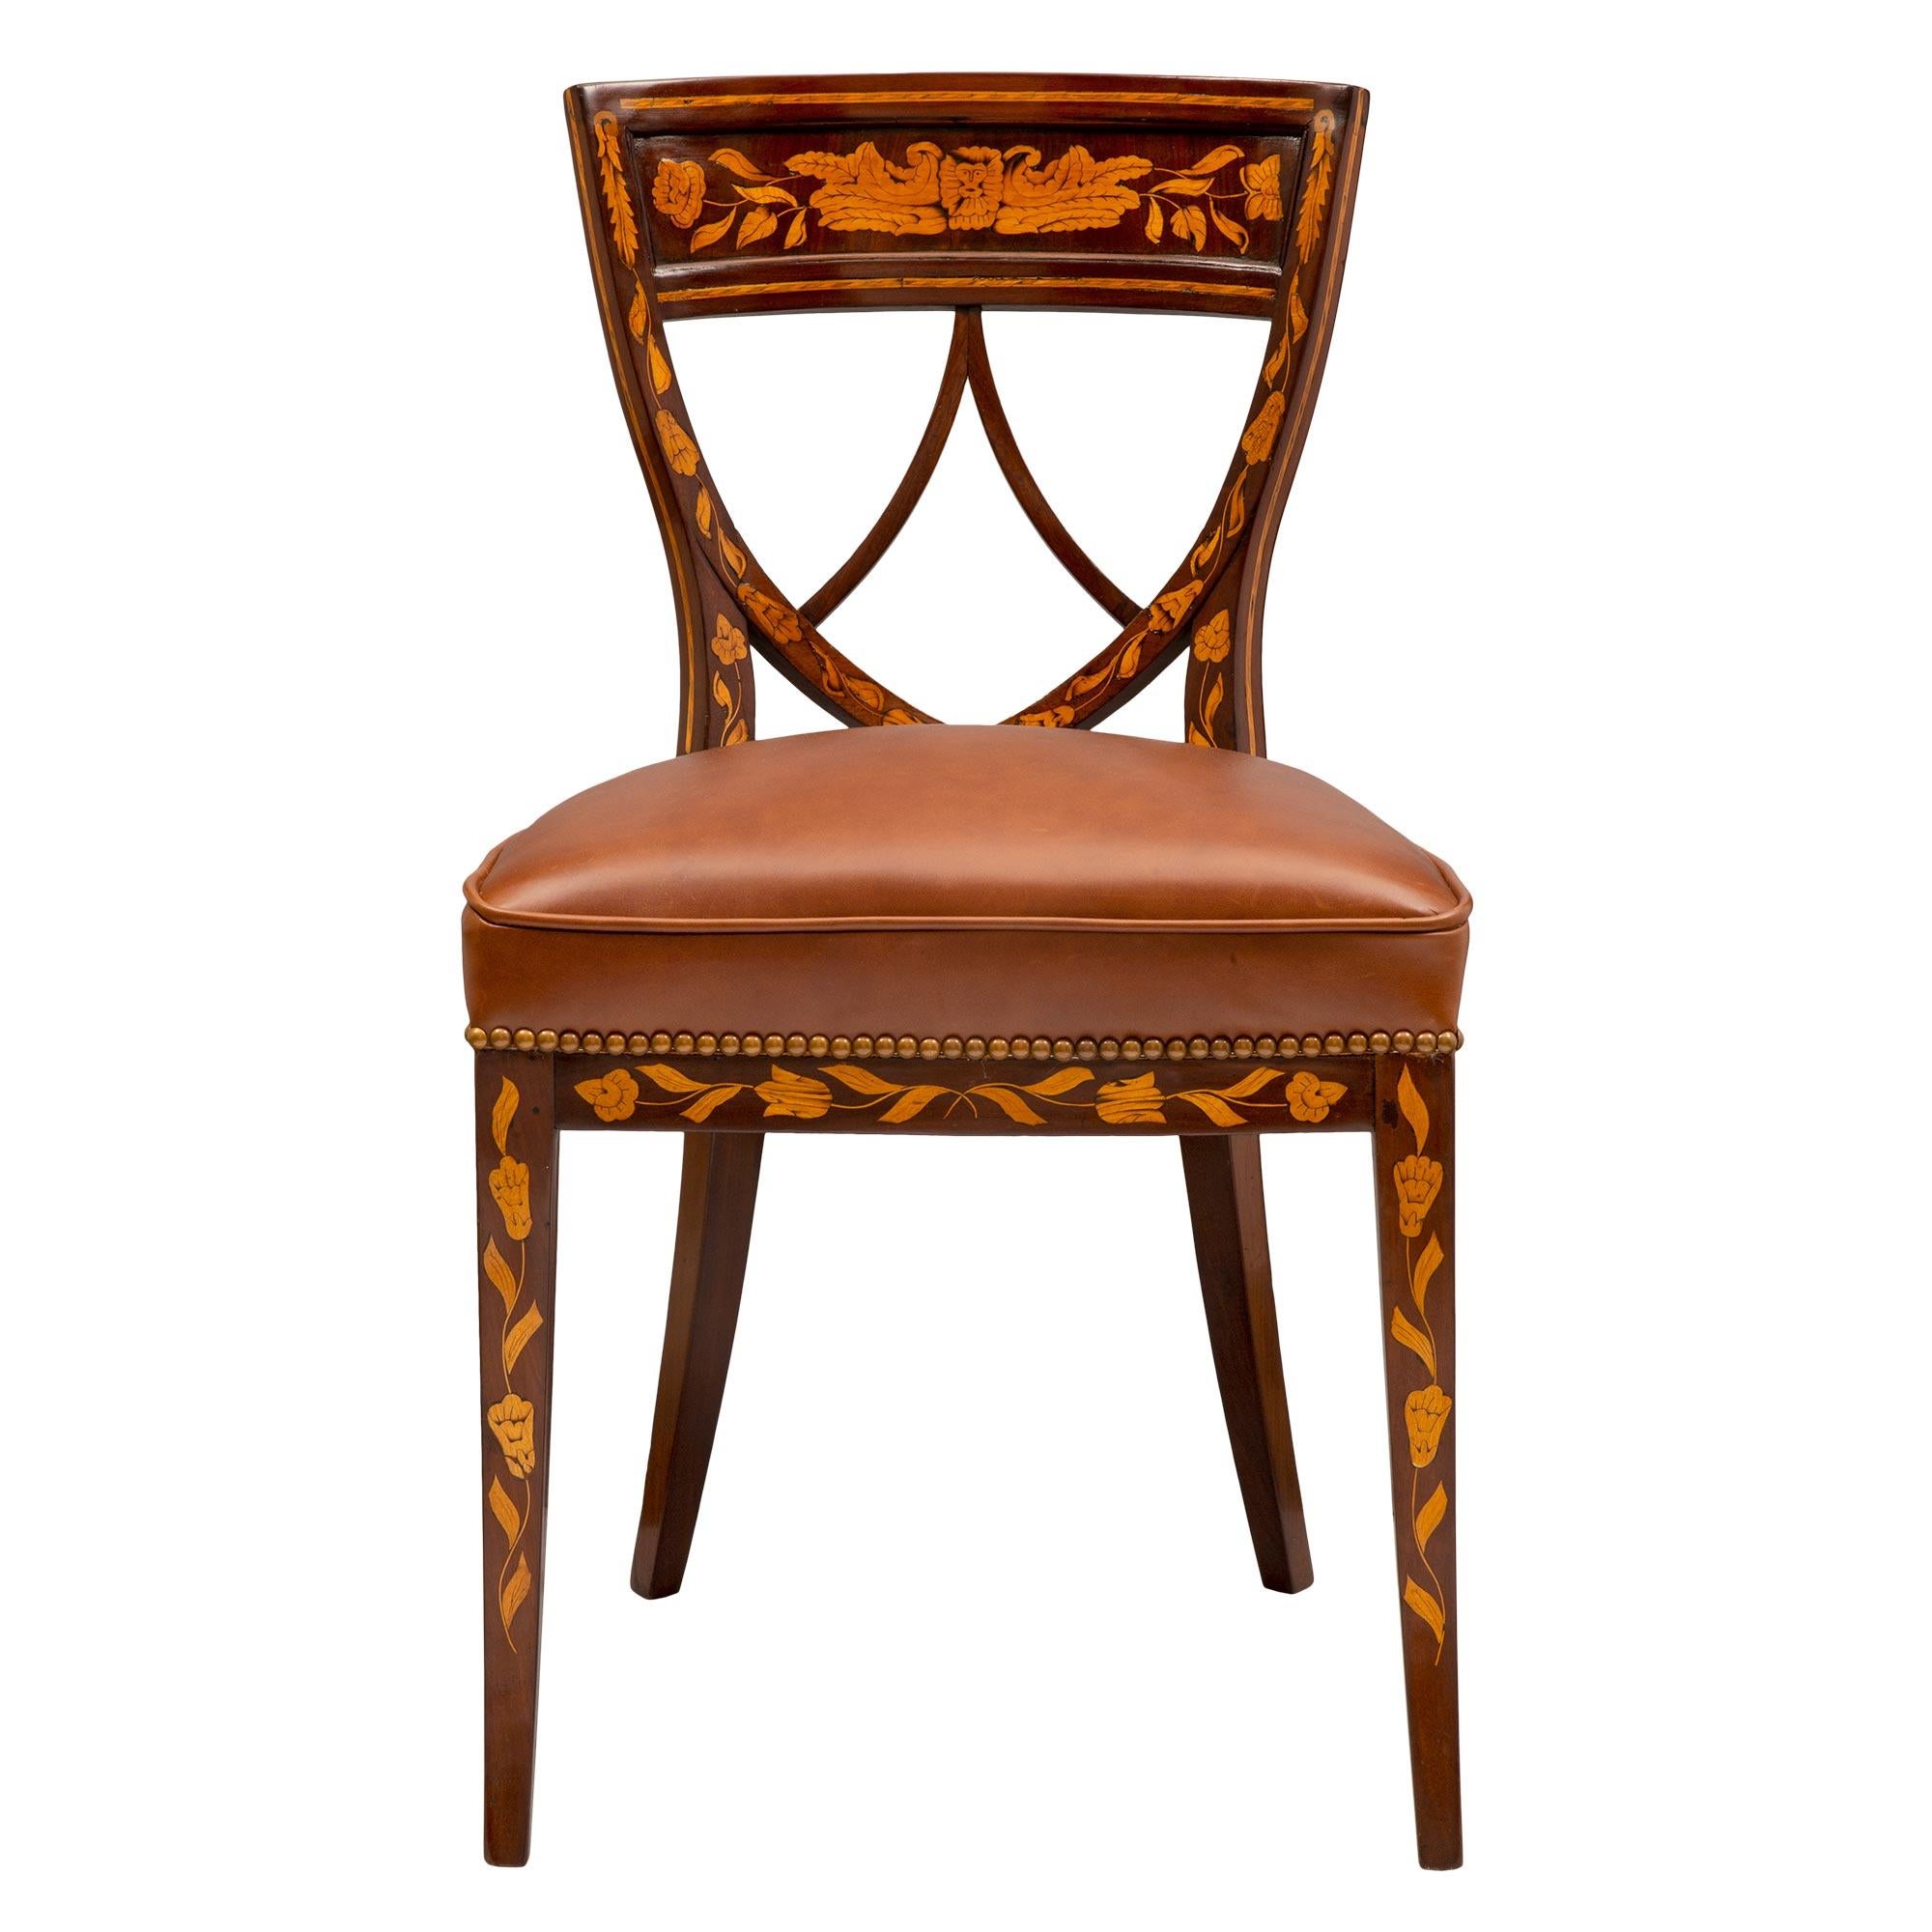 An exceptional and complete set of four Dutch 19th century Louis XVI style mahogany, walnut, and maple wood side chairs. Each beautiful chair is raised by elegant lightly curved mahogany legs with finely inlaid maple foliate designs. The superb